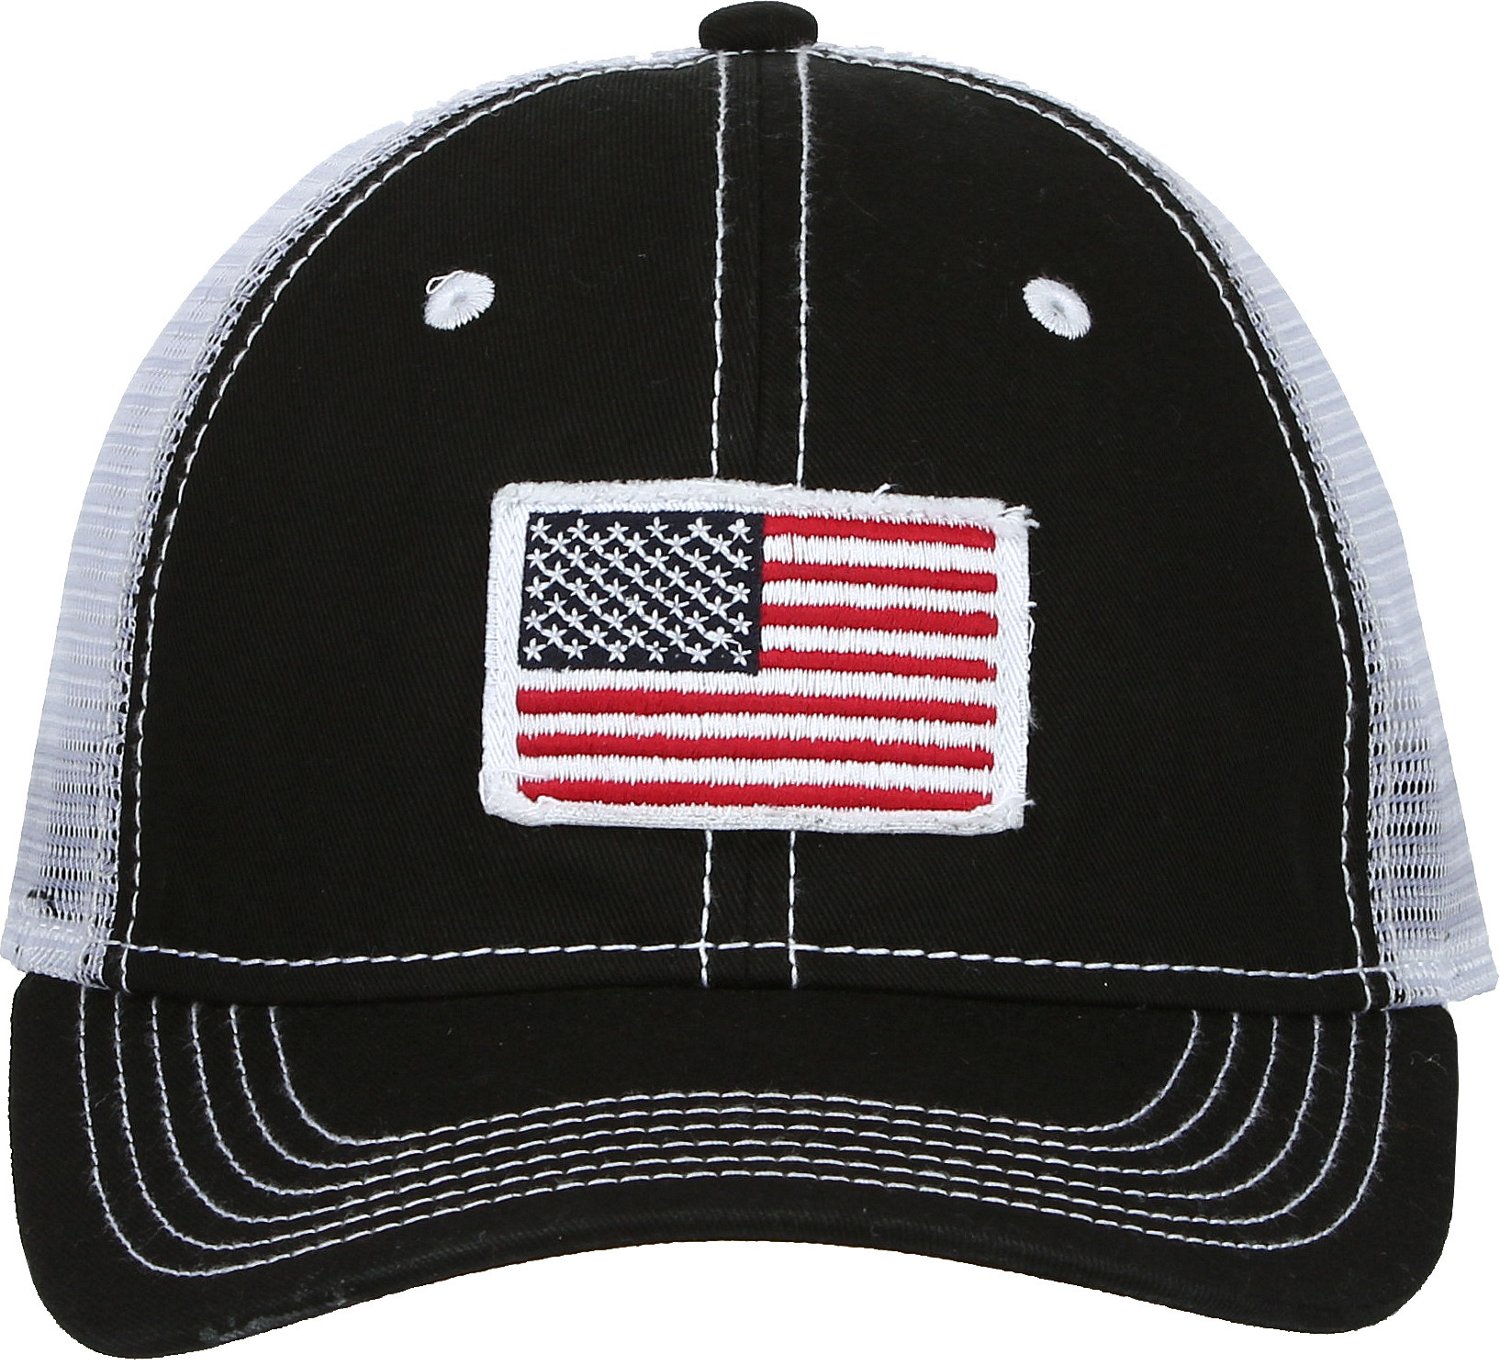 Academy Sports + Outdoors Mens American Flag Trucker Hat